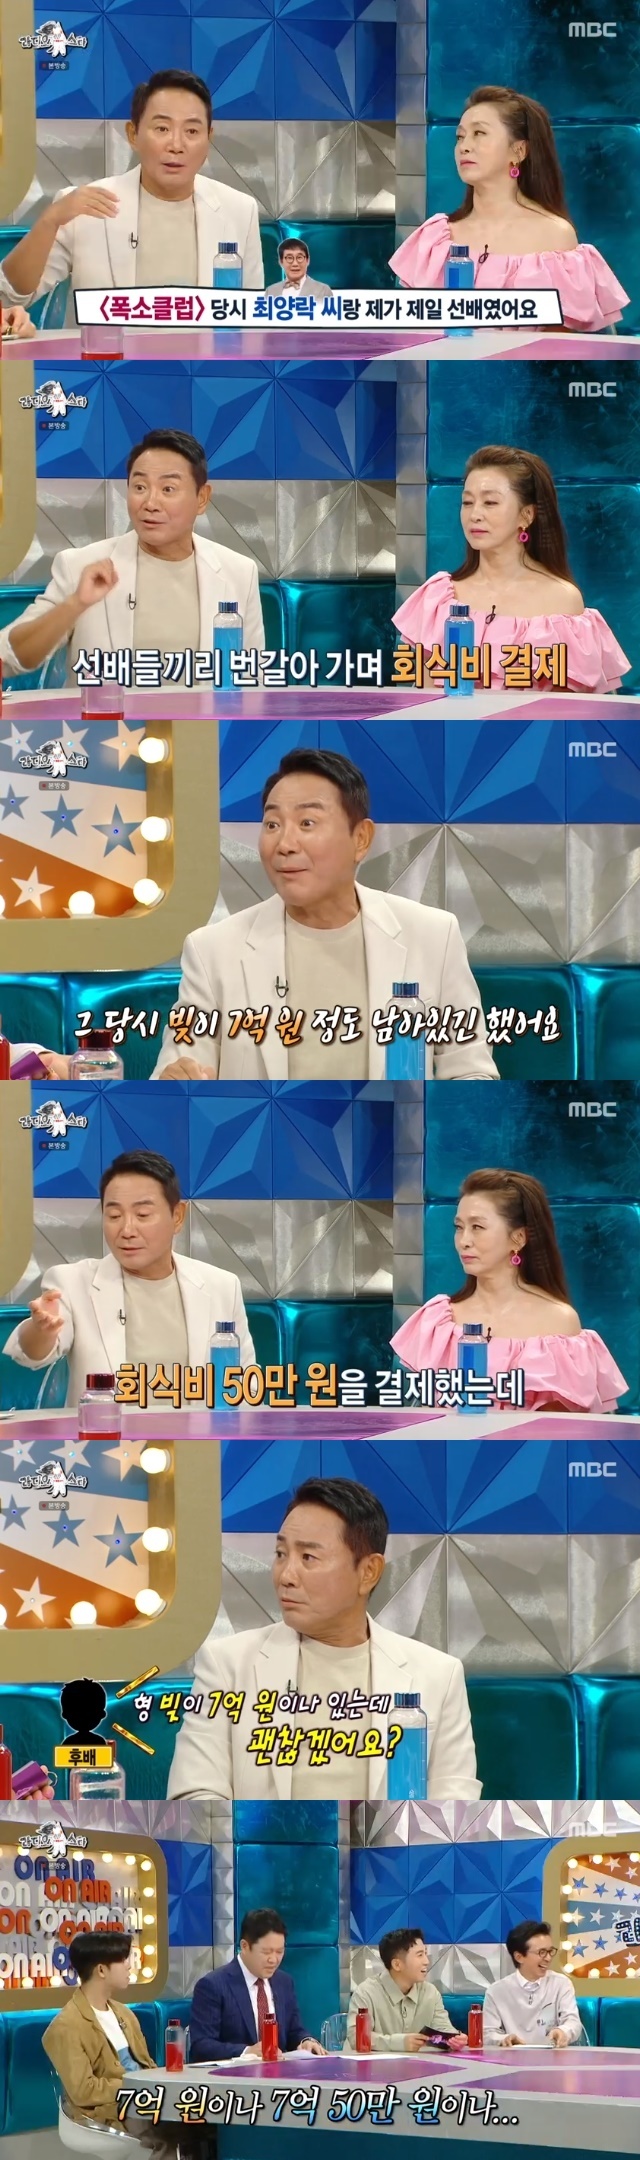 Comedian Lee Bong-won showed off his witty wits.Lee Bong-won, Moon Hee Kyung, Yoon Sung Ho and Oh Seung-hoon appeared as guests in the 832nd MBC entertainment show Radio Star (hereinafter referred to as Radio Star), which aired on August 30th.On this day, Yoon Sung Ho said that Lee Bong-won continues to challenge the business despite his failure because he said, I can not tolerate my personality because I am afraid of negative.At that time, he remembers, There are so many debts, are you okay? He said, Its like 500 million won or 502 million won.Lee Bong-won said that it was a bit of a war, and that he was the only one who shot Choi Yang-rak and himself at the time of the At that time, I was in debt, but I had about 700 million debts. I paid 500,000 won for dinner, but my junior said, Brother, I have 700 million debts.I said, What is different from 700 million won or 750 million won?Lee Bong-won then asked, Park Mi-sun is still skinship on his channel.In the video at the time, Park Mi-sun, who recently claimed that the kiss was this morning and that he often skinships these days.Lee Bong-won, who confirmed Park Mi-suns remarks in the article, said, Thats bullshit. I was going to send you proof of contents. Im not doing that. What kind of skinship is it when you have separate rooms?I do not have a skinship on a day when I meet a week.Lee Bong-won then nodded to MCs who wondered why Park Mi-sun made such a statement, saying, It would have been because of the number of views.Even Lee Bong-won revealed that Park Mi-sun was slower to inform Park Mi-sun than Gim Gu-ra, and that Park Mi-sun had learned from Gim Gu-ra that he had gone on a pilgrimage to Israel.Lee Bong-won and Park Mi-sun celebrated their 30th wedding anniversary this year.Lee Bong-won said, I bought a bag (for Park Mi-sun) to take care of my birthday. Lee Bong-won said, Im sorry, it was my birthday a while ago, but my mom bought a clock.Clock of the Rs.He said, I sent a small one before, but I received something too big. Im in trouble. What do you do next? Gim Gu-ra said, Do not think about doing anything and be careful.Lee Bong-won then sent a message saying, I had a hard time for the 30th anniversary. Get off work.However, I was attracted by the fact that I was stubborn about not saying that I love you.Meanwhile, Lee Bong-won married a comedian Park Mi-sun in 1993 and has one male and one female.Lee Bong-won, who currently runs a champon house in Cheonan, has previously appeared on SBS Sangmyonmong 2 - You Are My Destiny and said that he has cleared all 700 million debts accumulated by seven business failures alone.